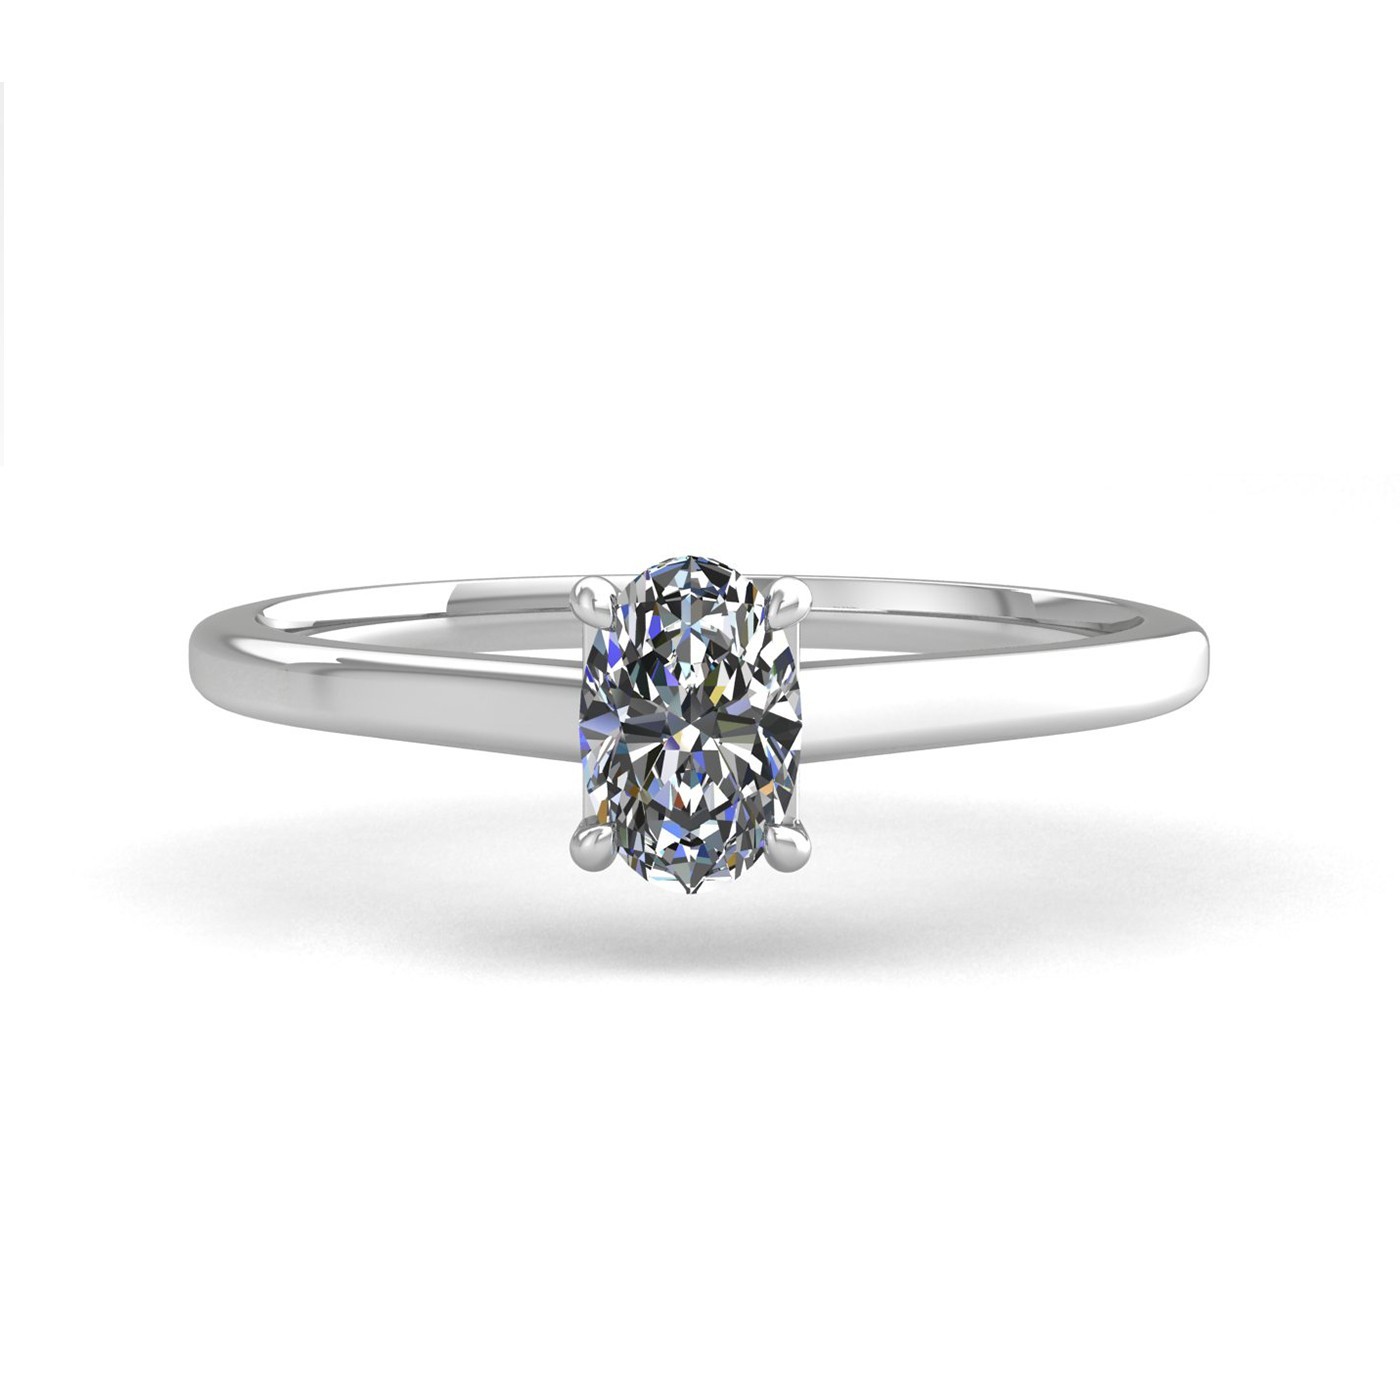 18k white gold  2,50 ct 4 prongs solitaire oval cut diamond engagement ring with whisper thin band Photos & images